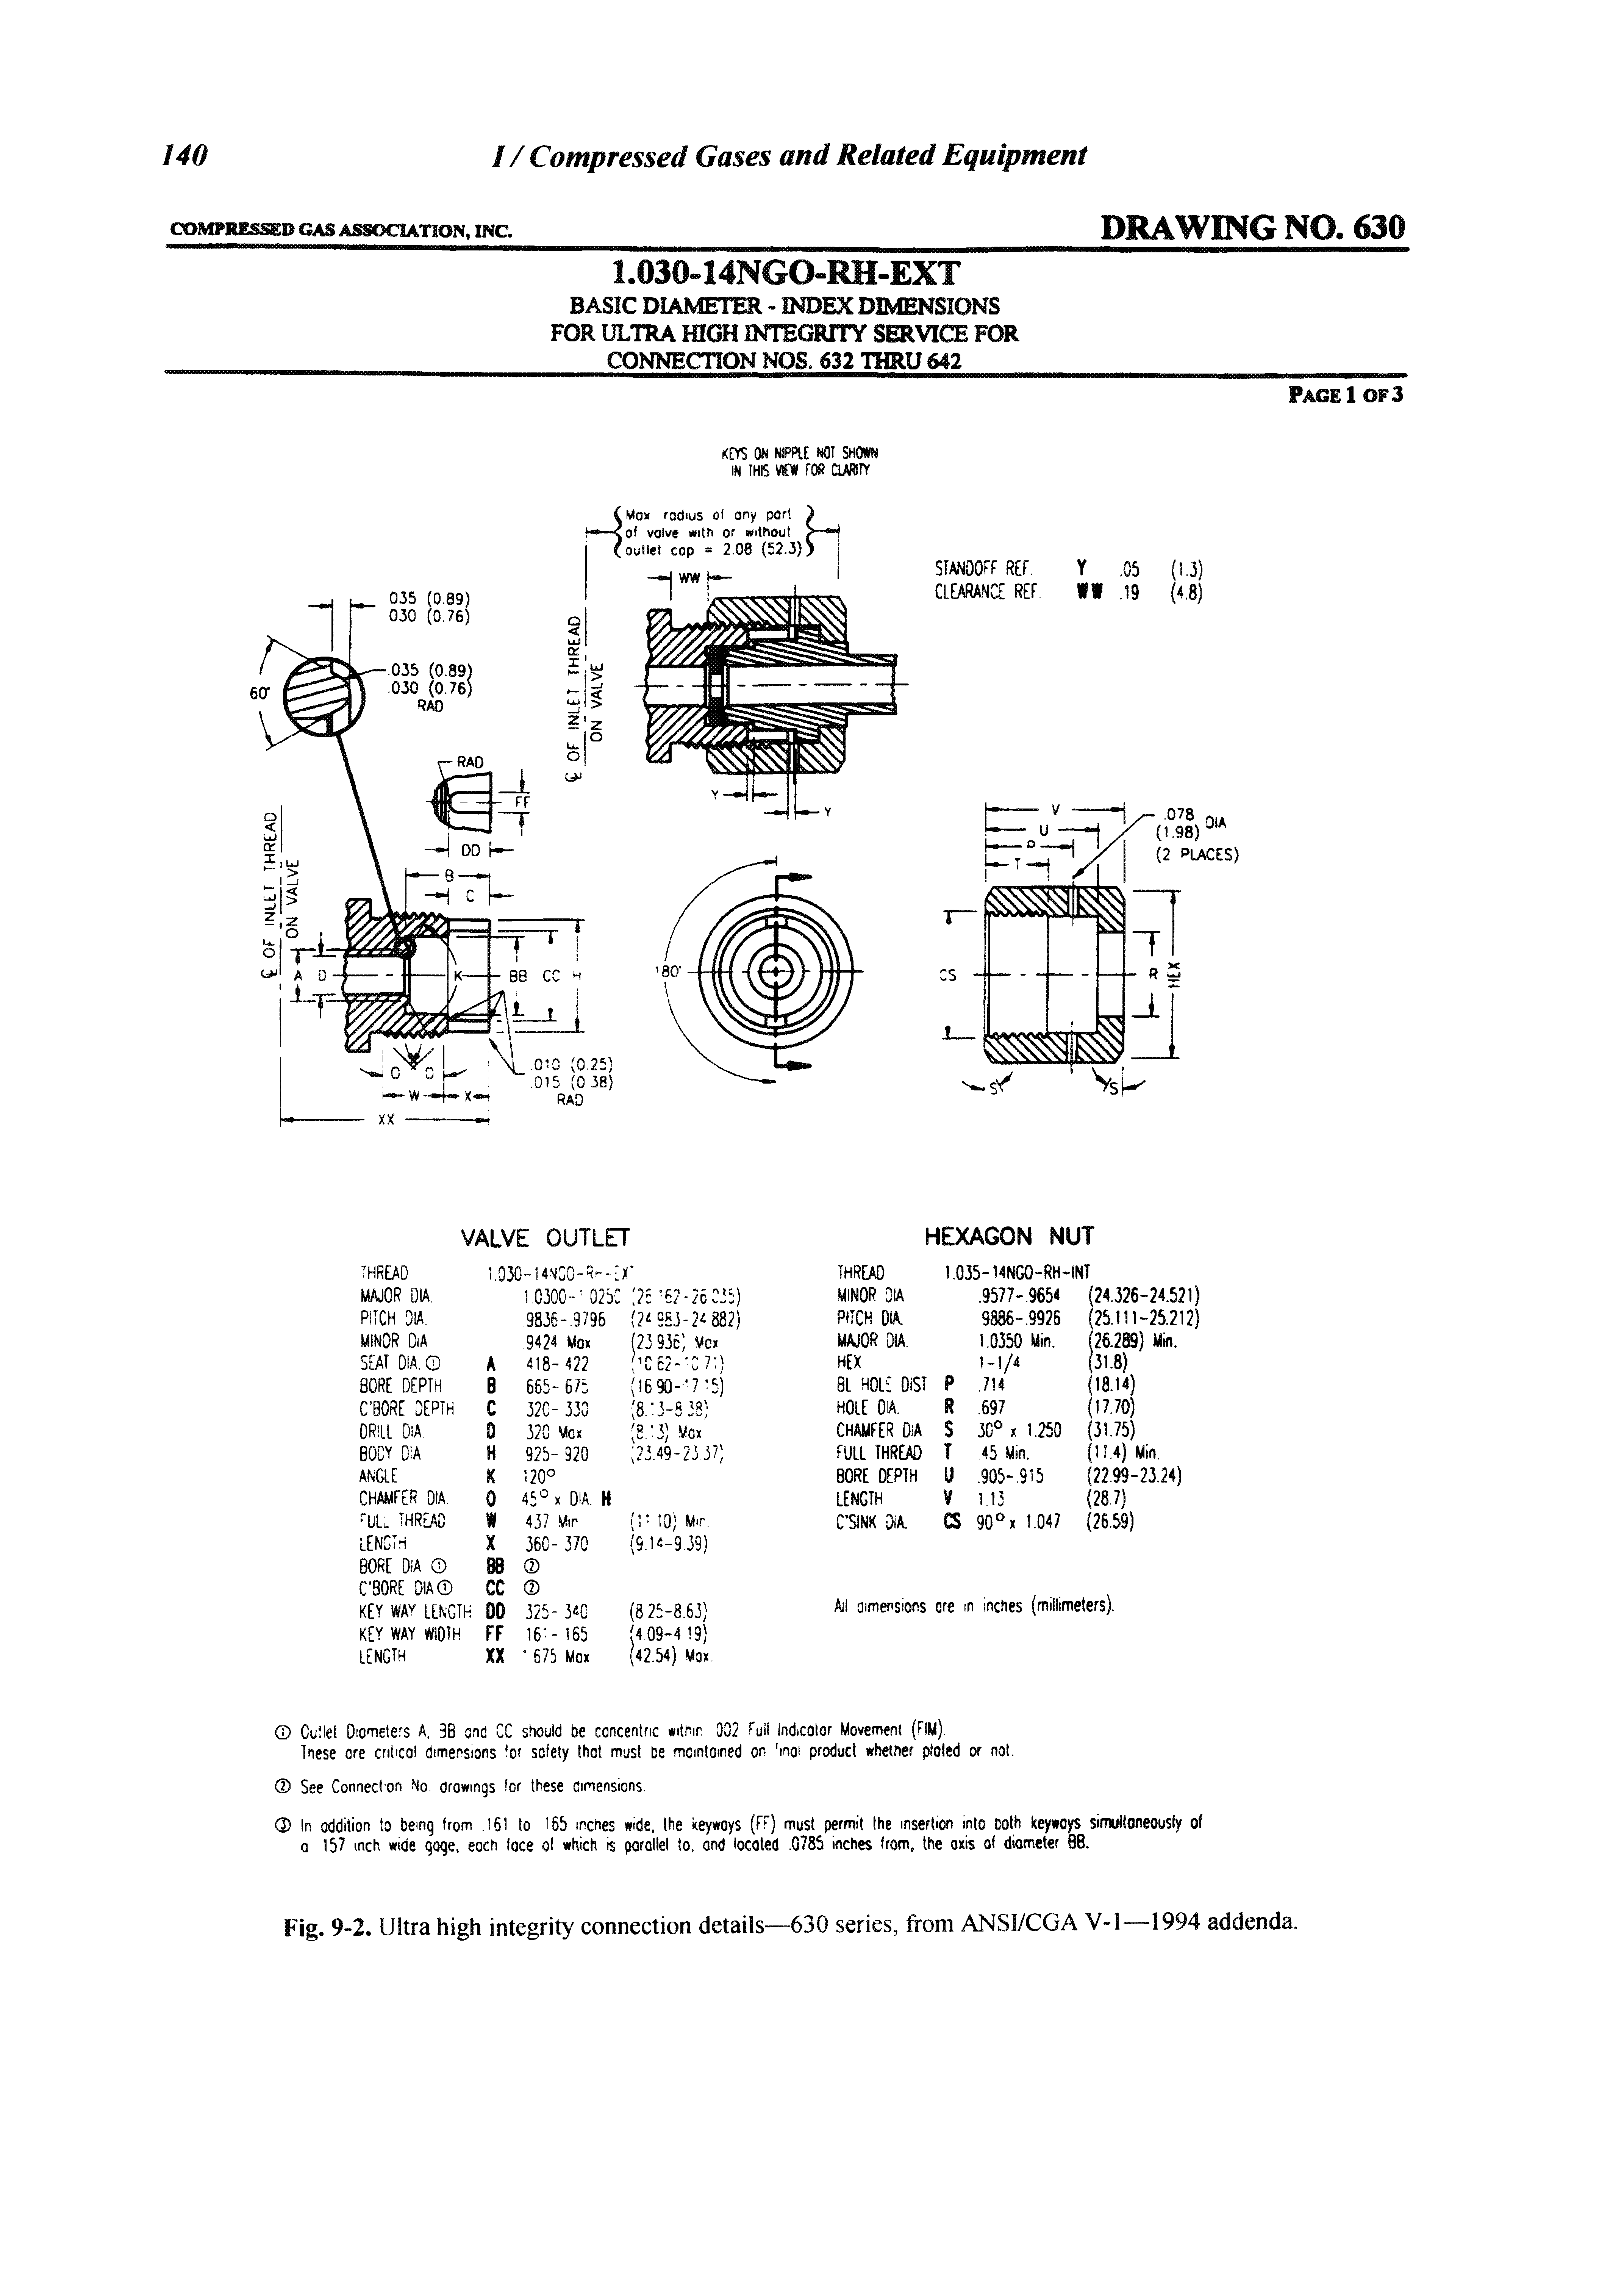 Fig. 9-2. Ultra high integrity connection details—630 series, from ANSl/CGA V-1—1994 addenda.